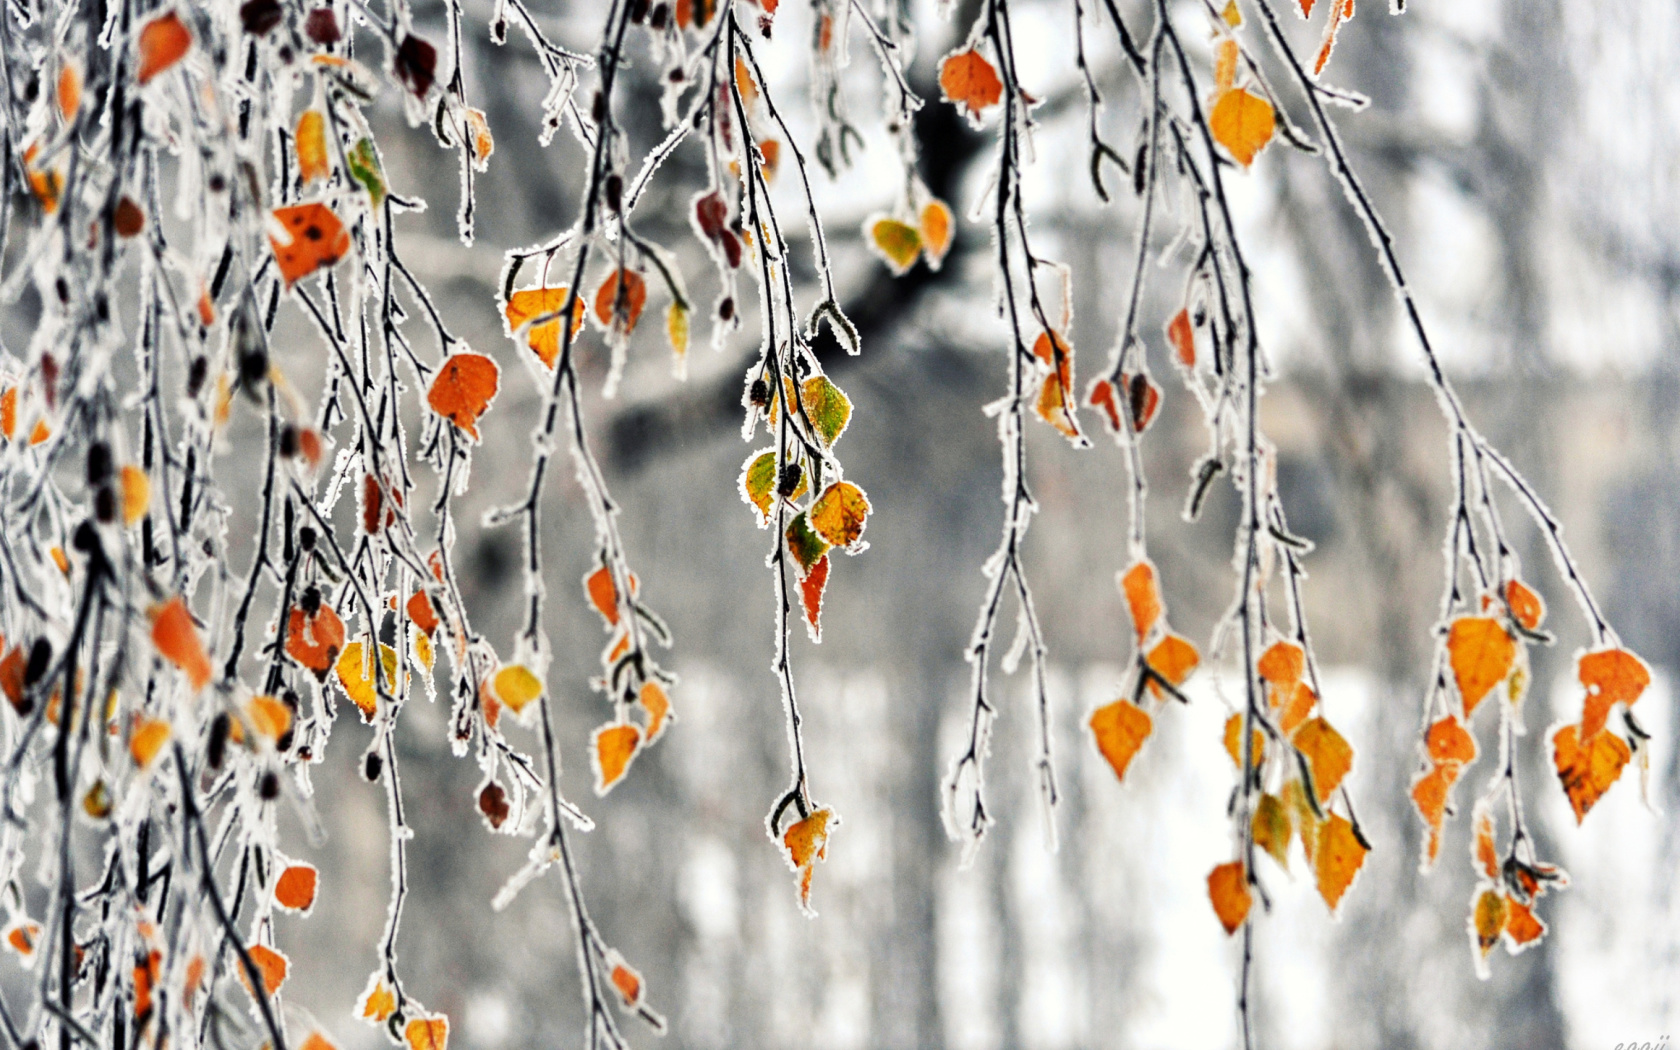 Autumn leaves in frost screenshot #1 1680x1050